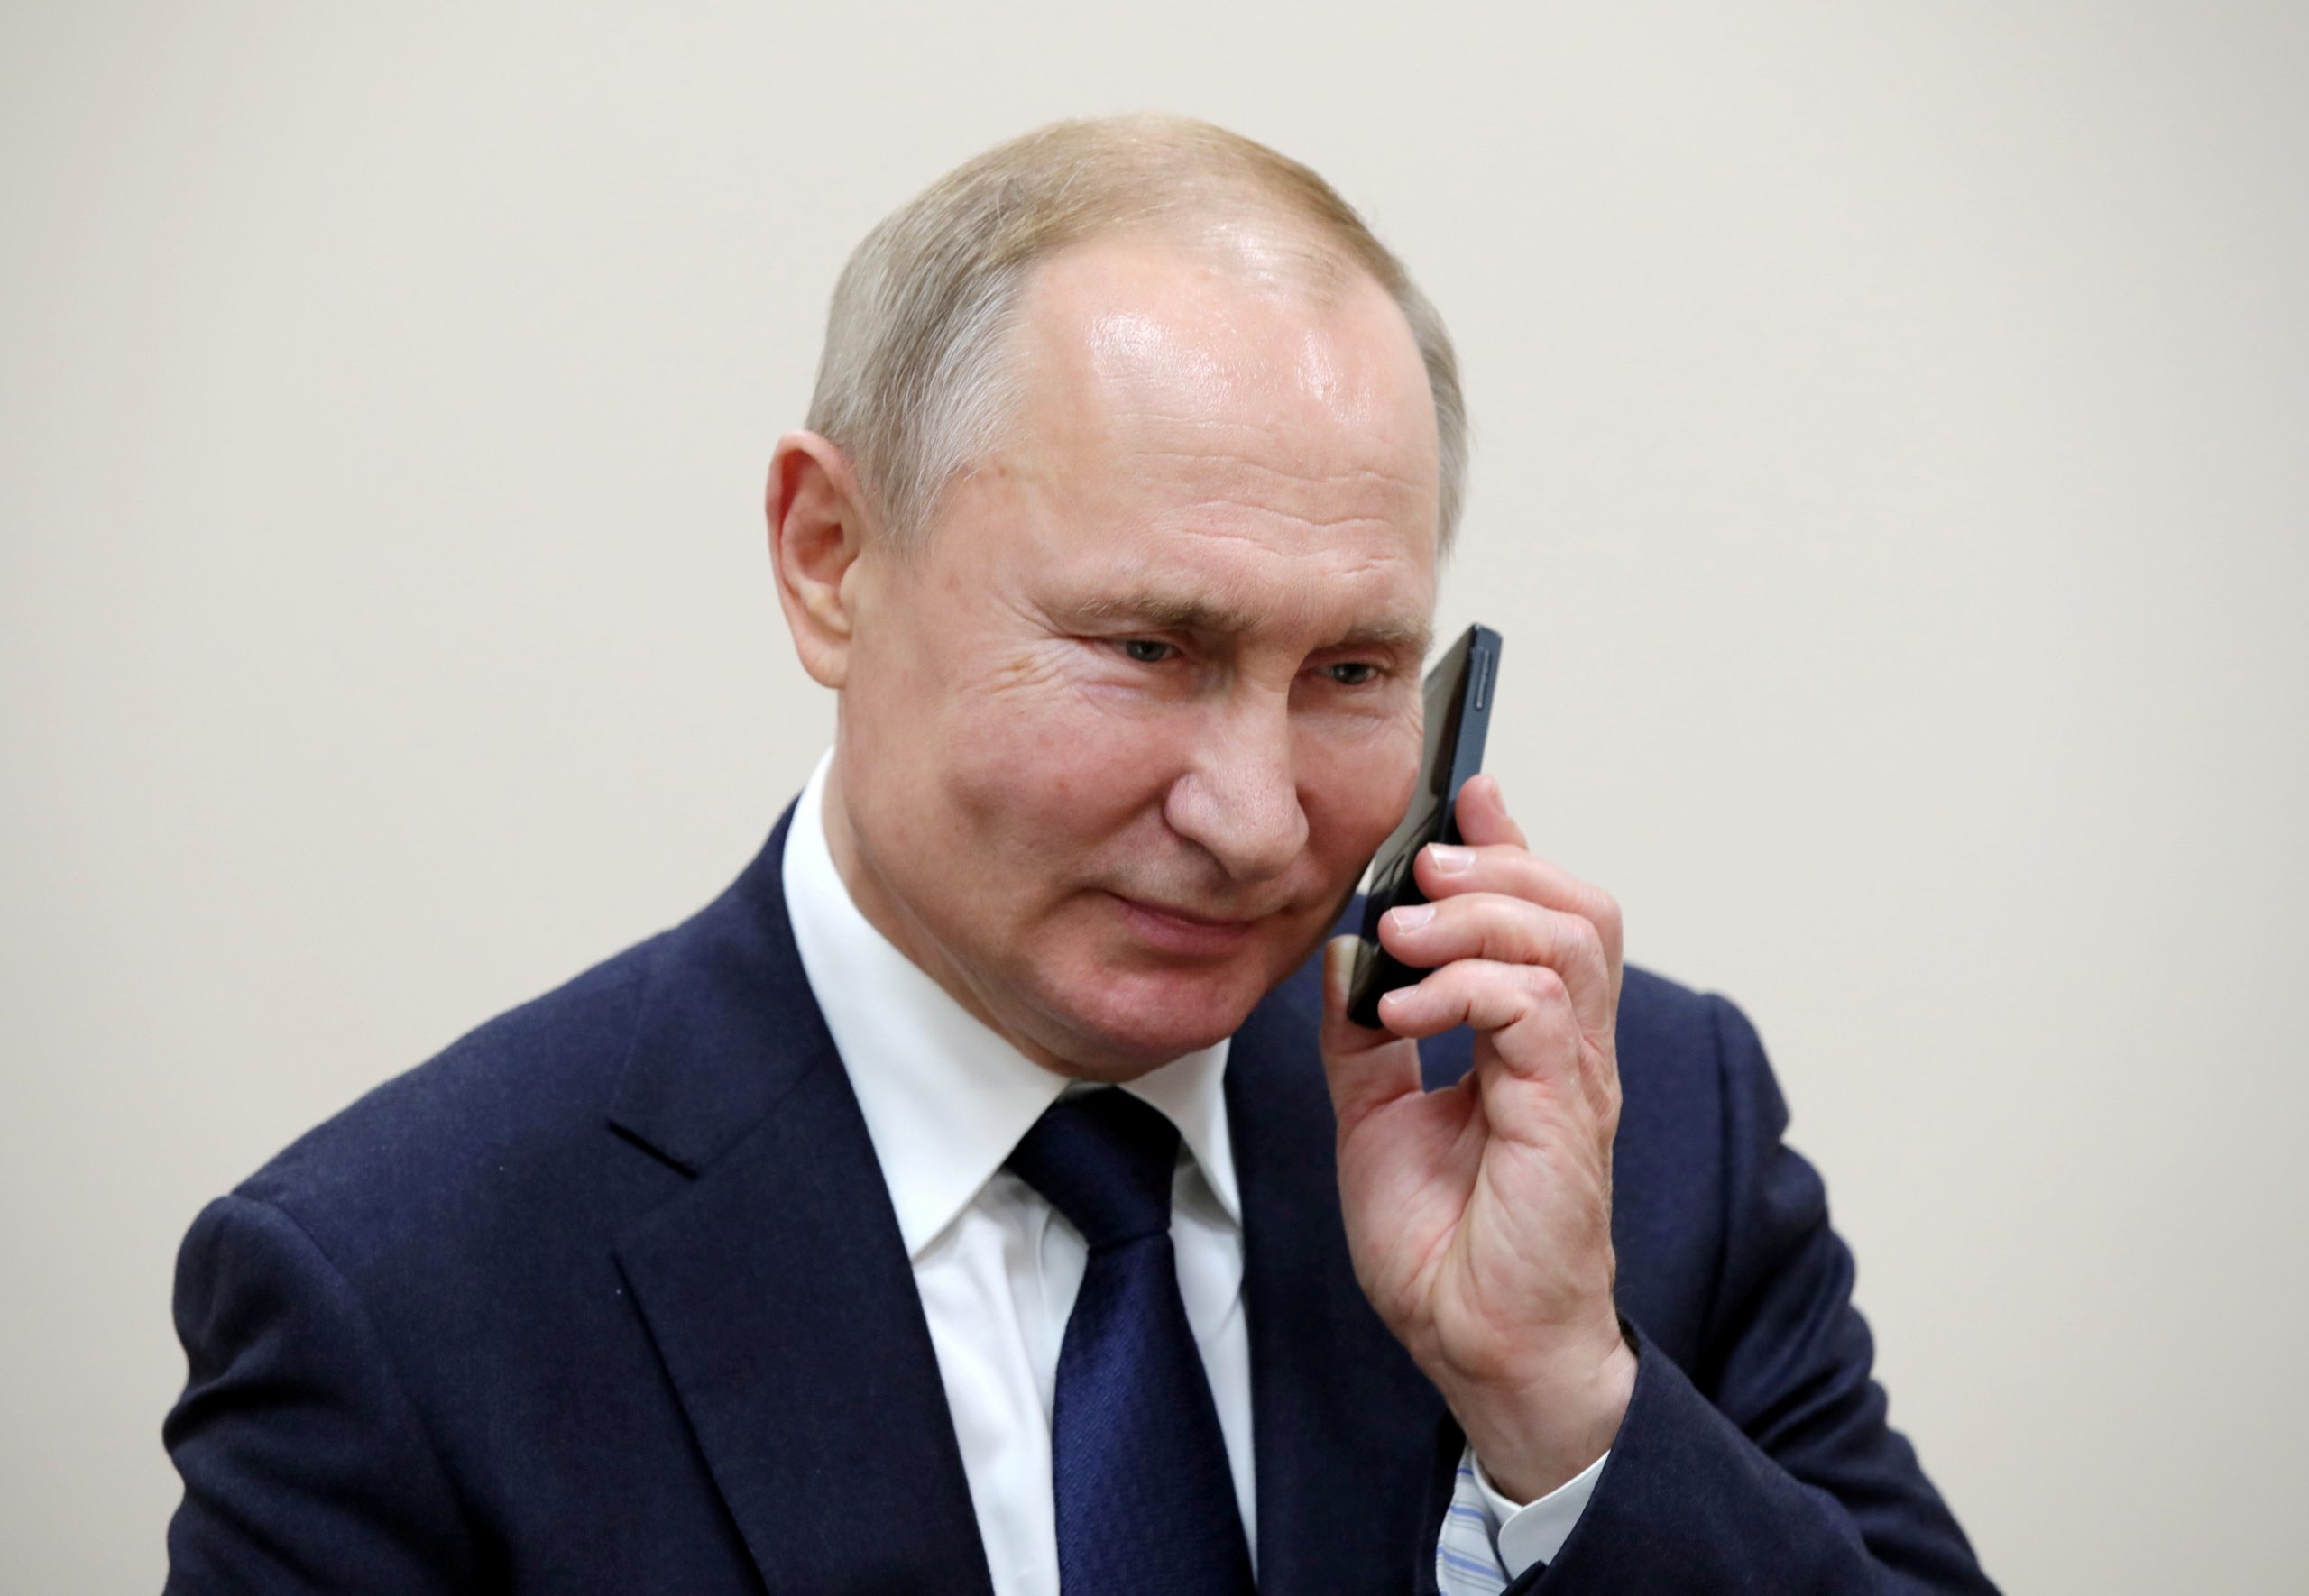 FILE PHOTO: Russian President Vladimir Putin talks on the phone in the settlement of Enem FILE PHOTO: Russian President Vladimir Putin talks on the phone in the settlement of Enem, Republic of Adygea, Russia December 23, 2019. Sputnik/Mikhail Klimentyev/Kremlin via REUTERS ATTENTION EDITORS - THIS IMAGE WAS PROVIDED BY A THIRD PARTY./File Photo Sputnik Photo Agency